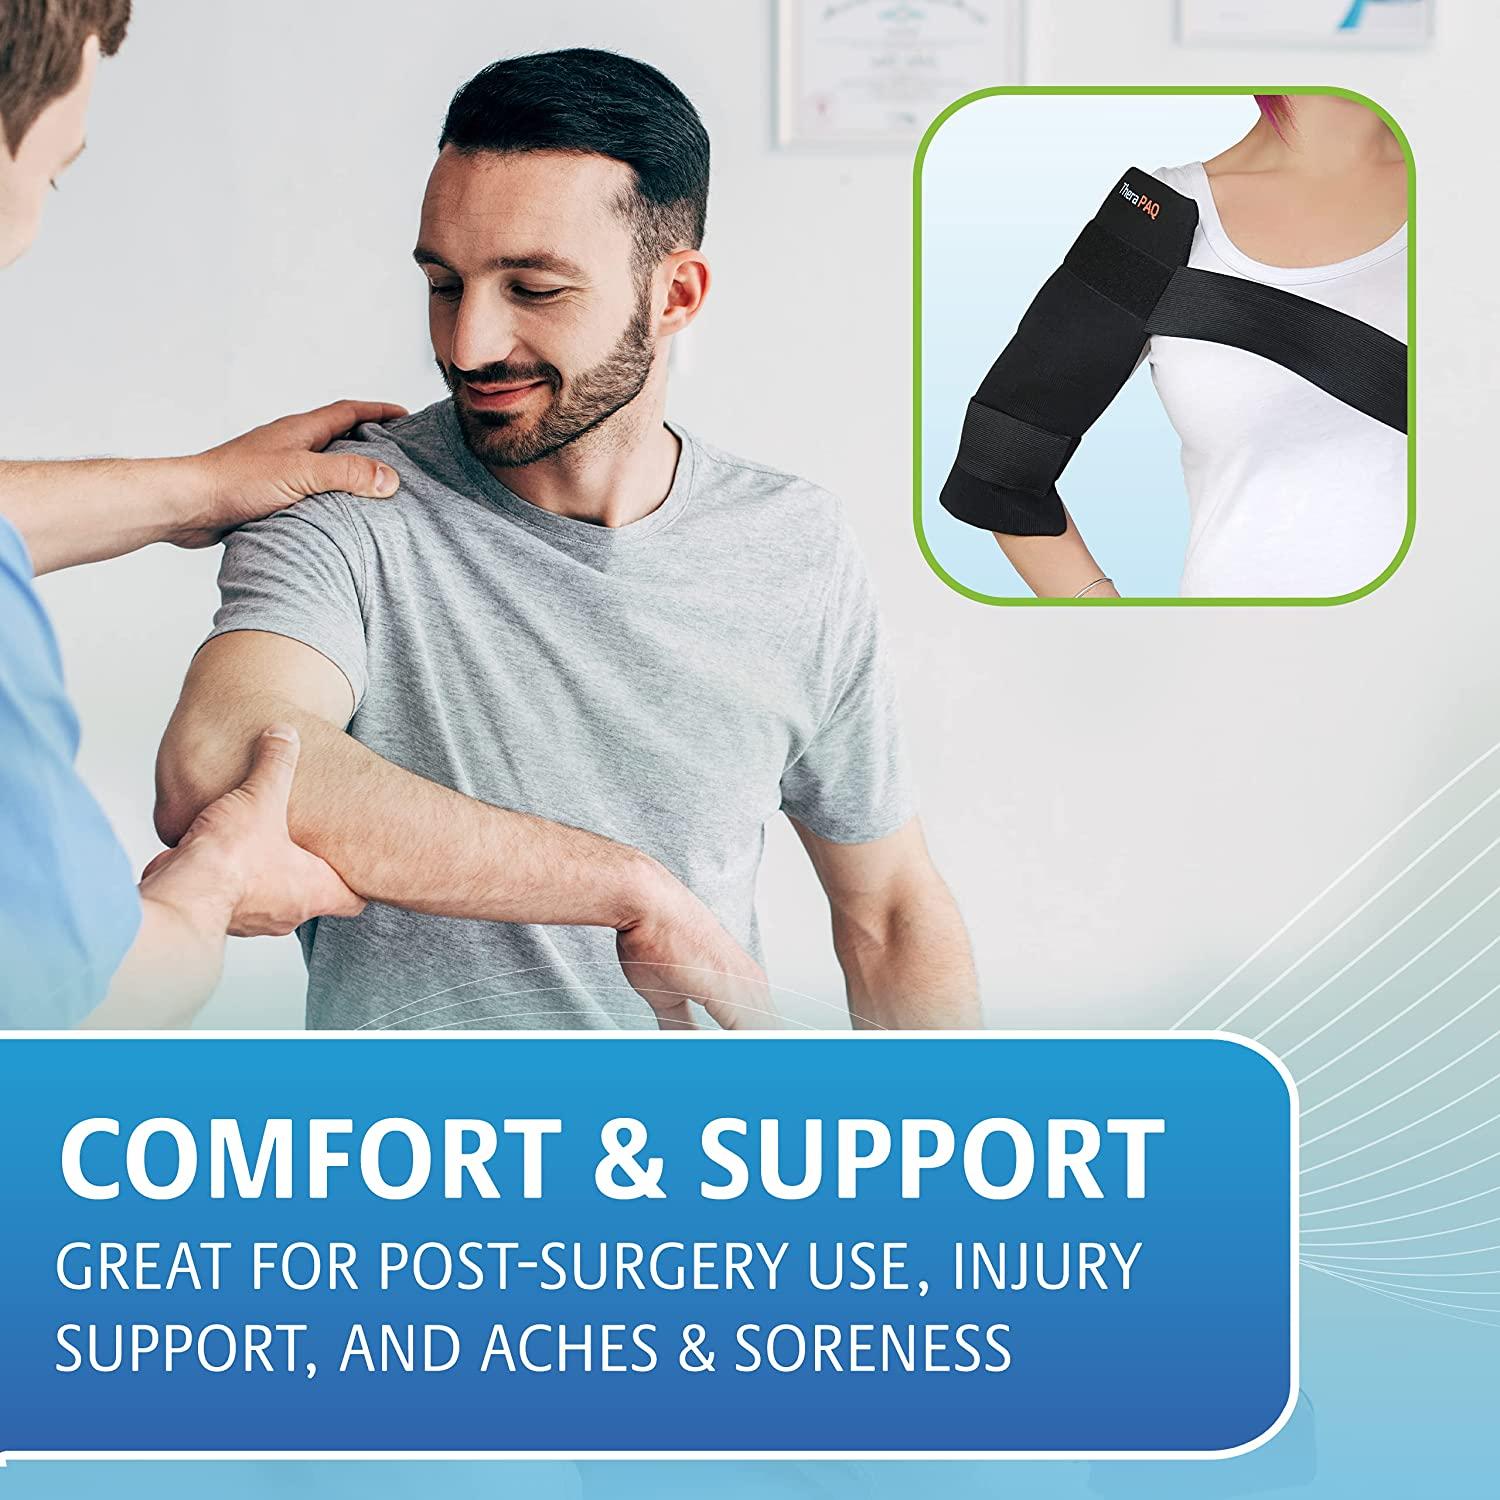 TheraPAQ Ice Packs for Injuries Reusable Version - Adjustable Large 14 x 11 inch Hot and Cold Gel Pack wAdjustable Strap for Hip Shoulder Knee and Ba